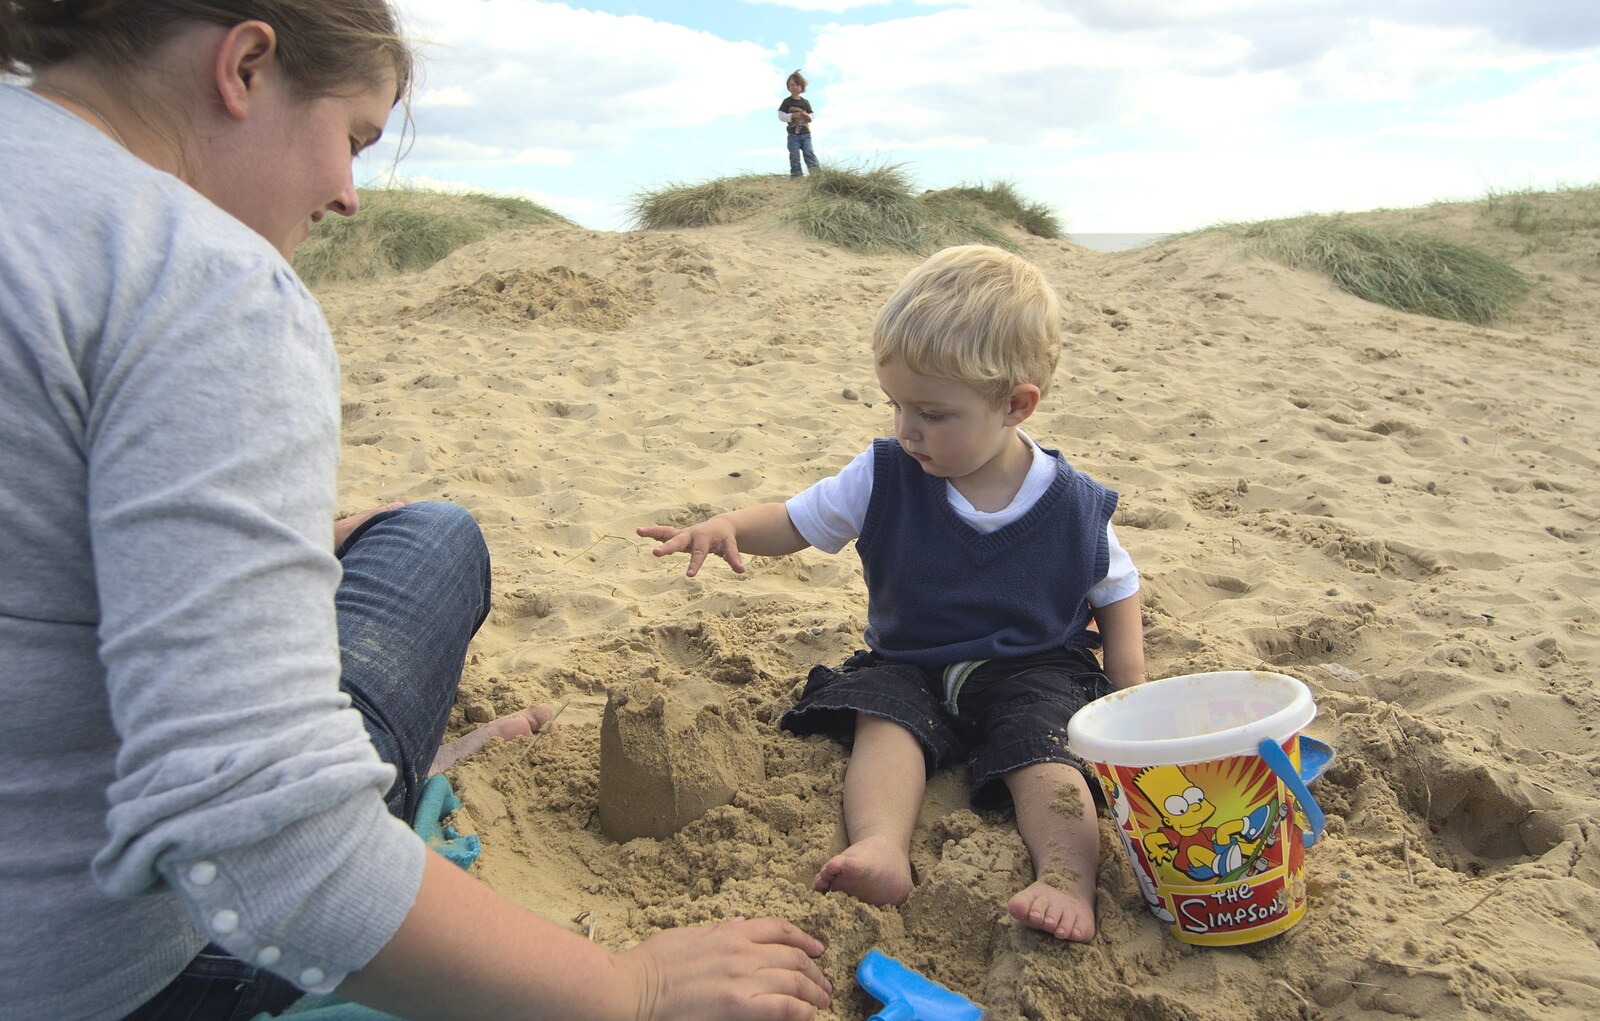 A Trip to Walberswick, Suffolk - 12th September 2010: Fred builds a sand castle